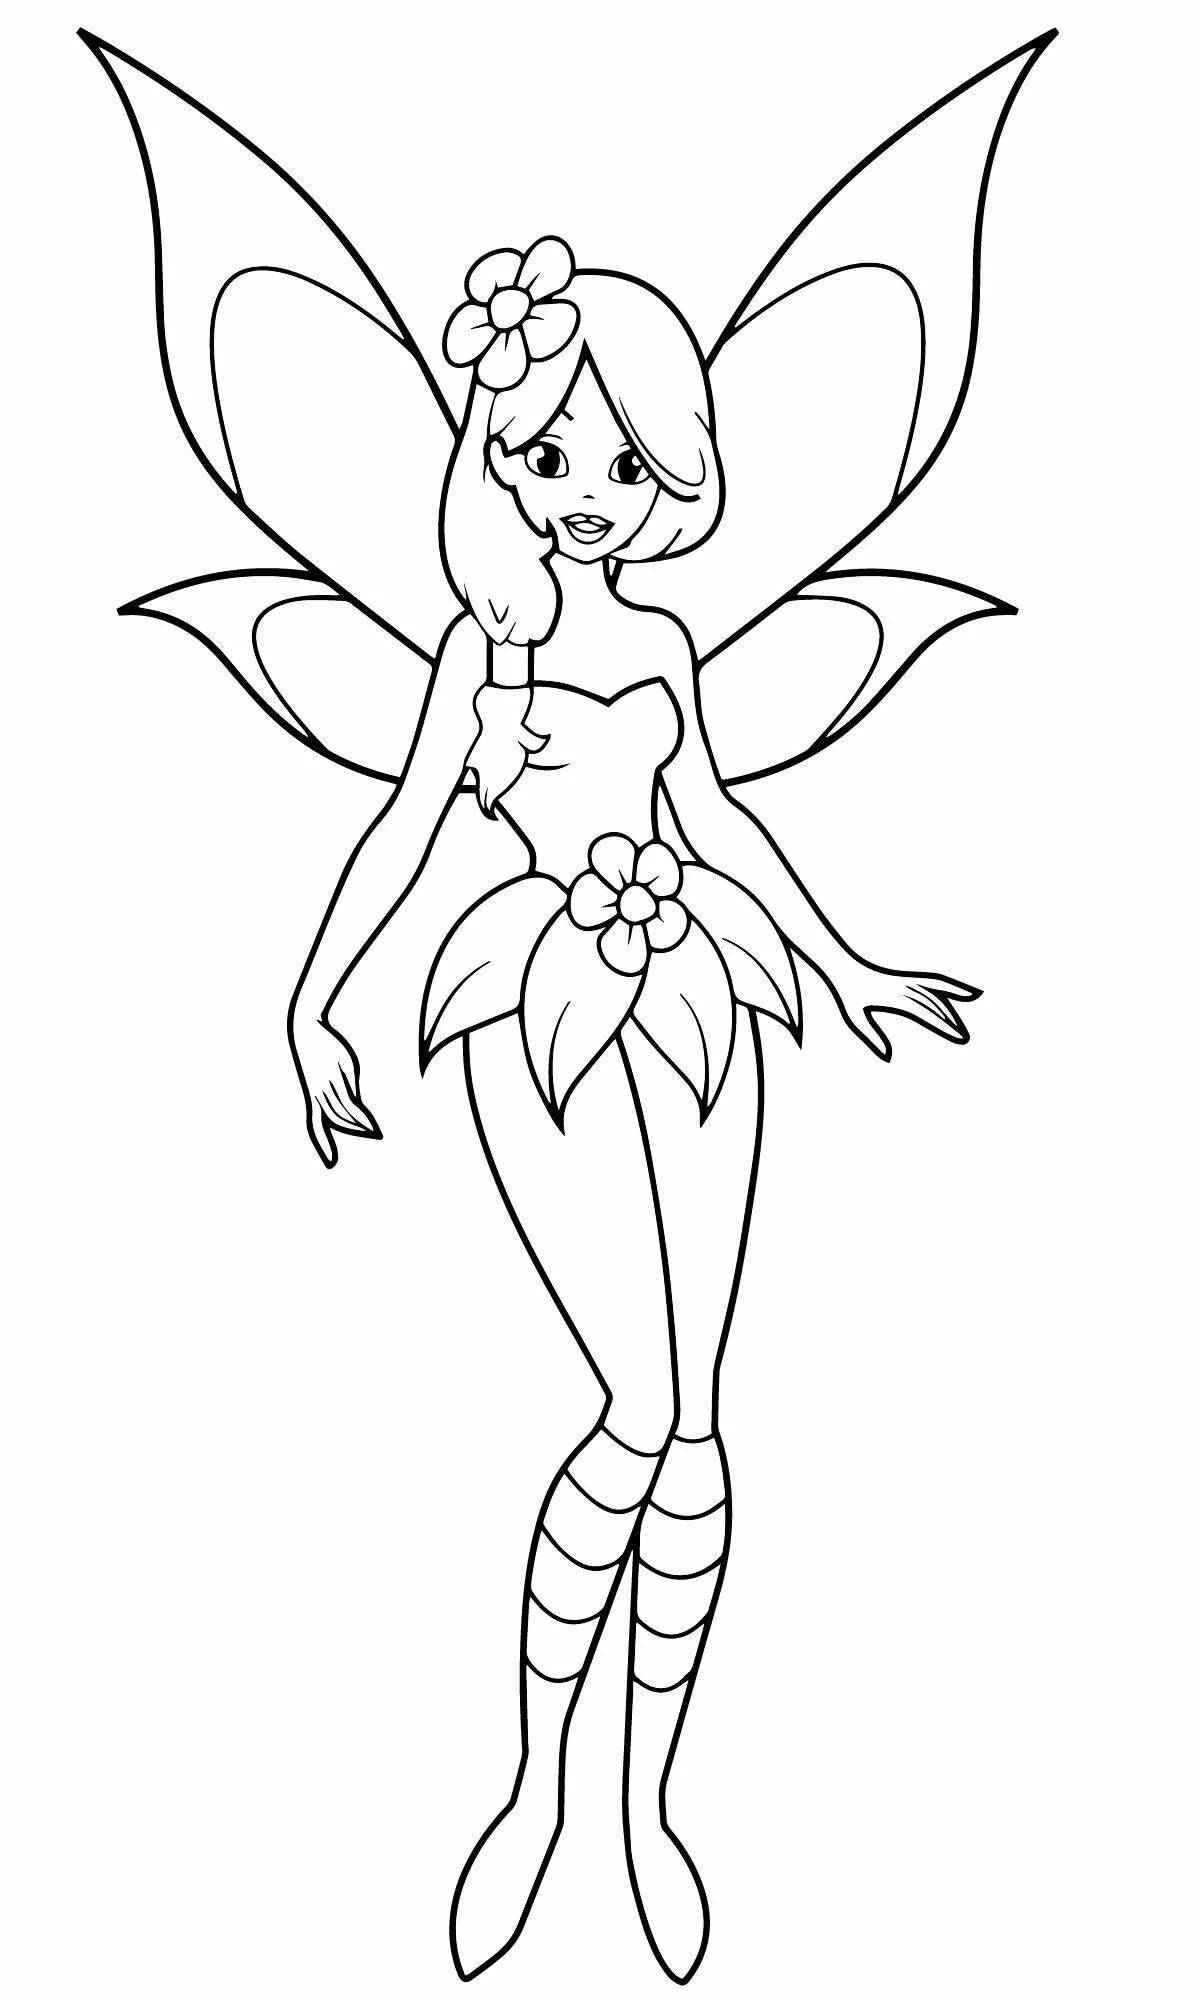 Wonderful fairy coloring pages for kids 5-6 years old